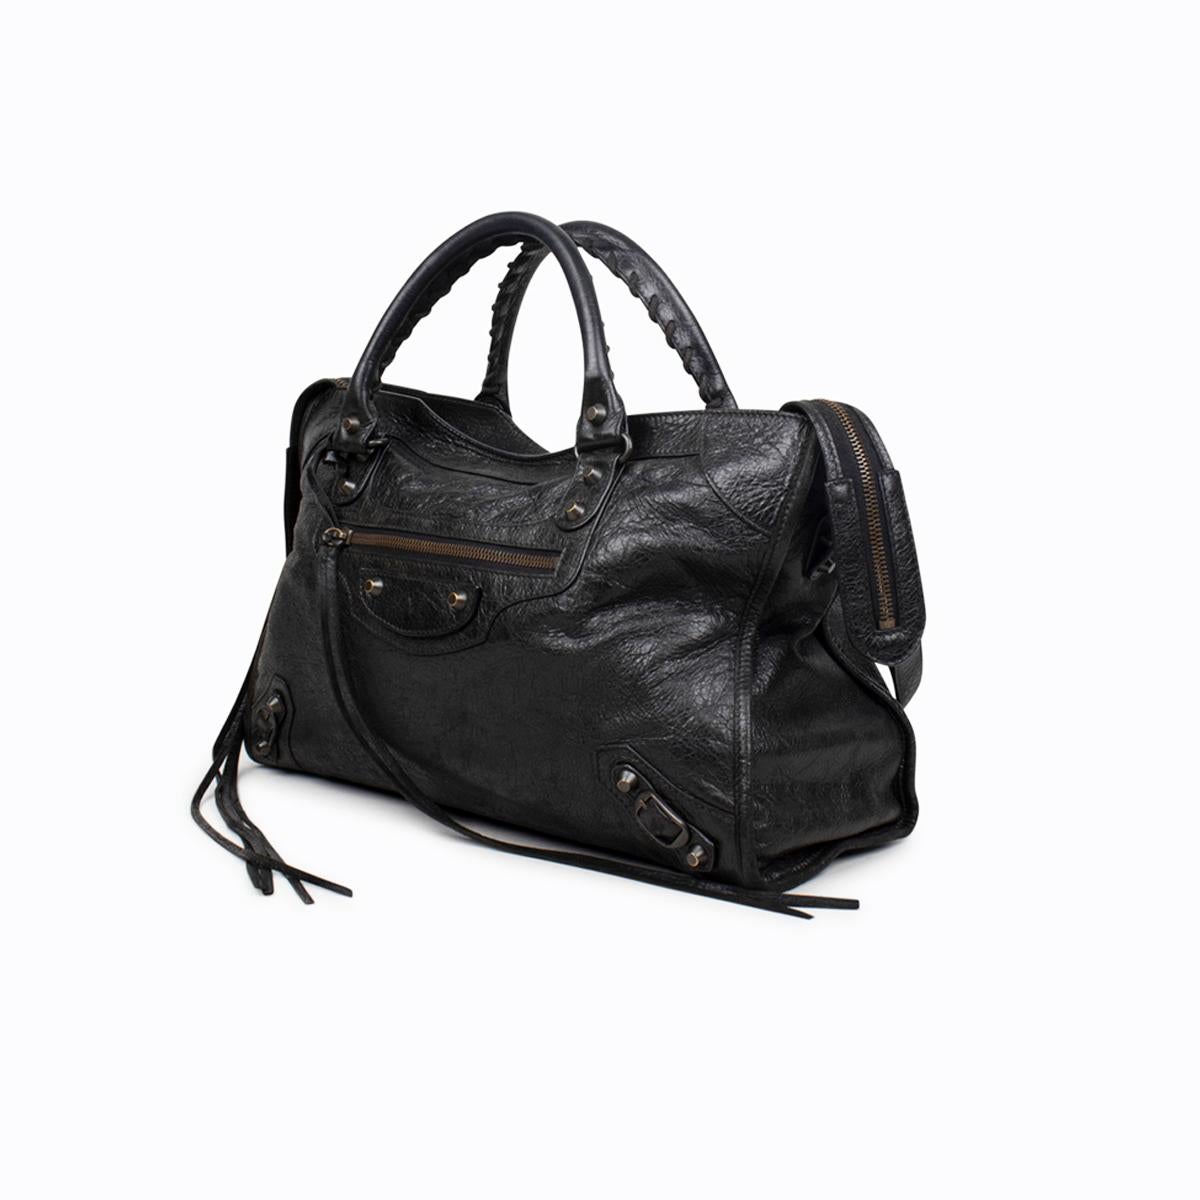 Black Arena leather Balenciaga Motocross Classic City bag with

- Brass hardware
- Detachable flat shoulder strap
- Dual rolled handles with whipstitch trim
- Zip pocket at front, black woven lining, zip pocket at interior wall and zip-closure at